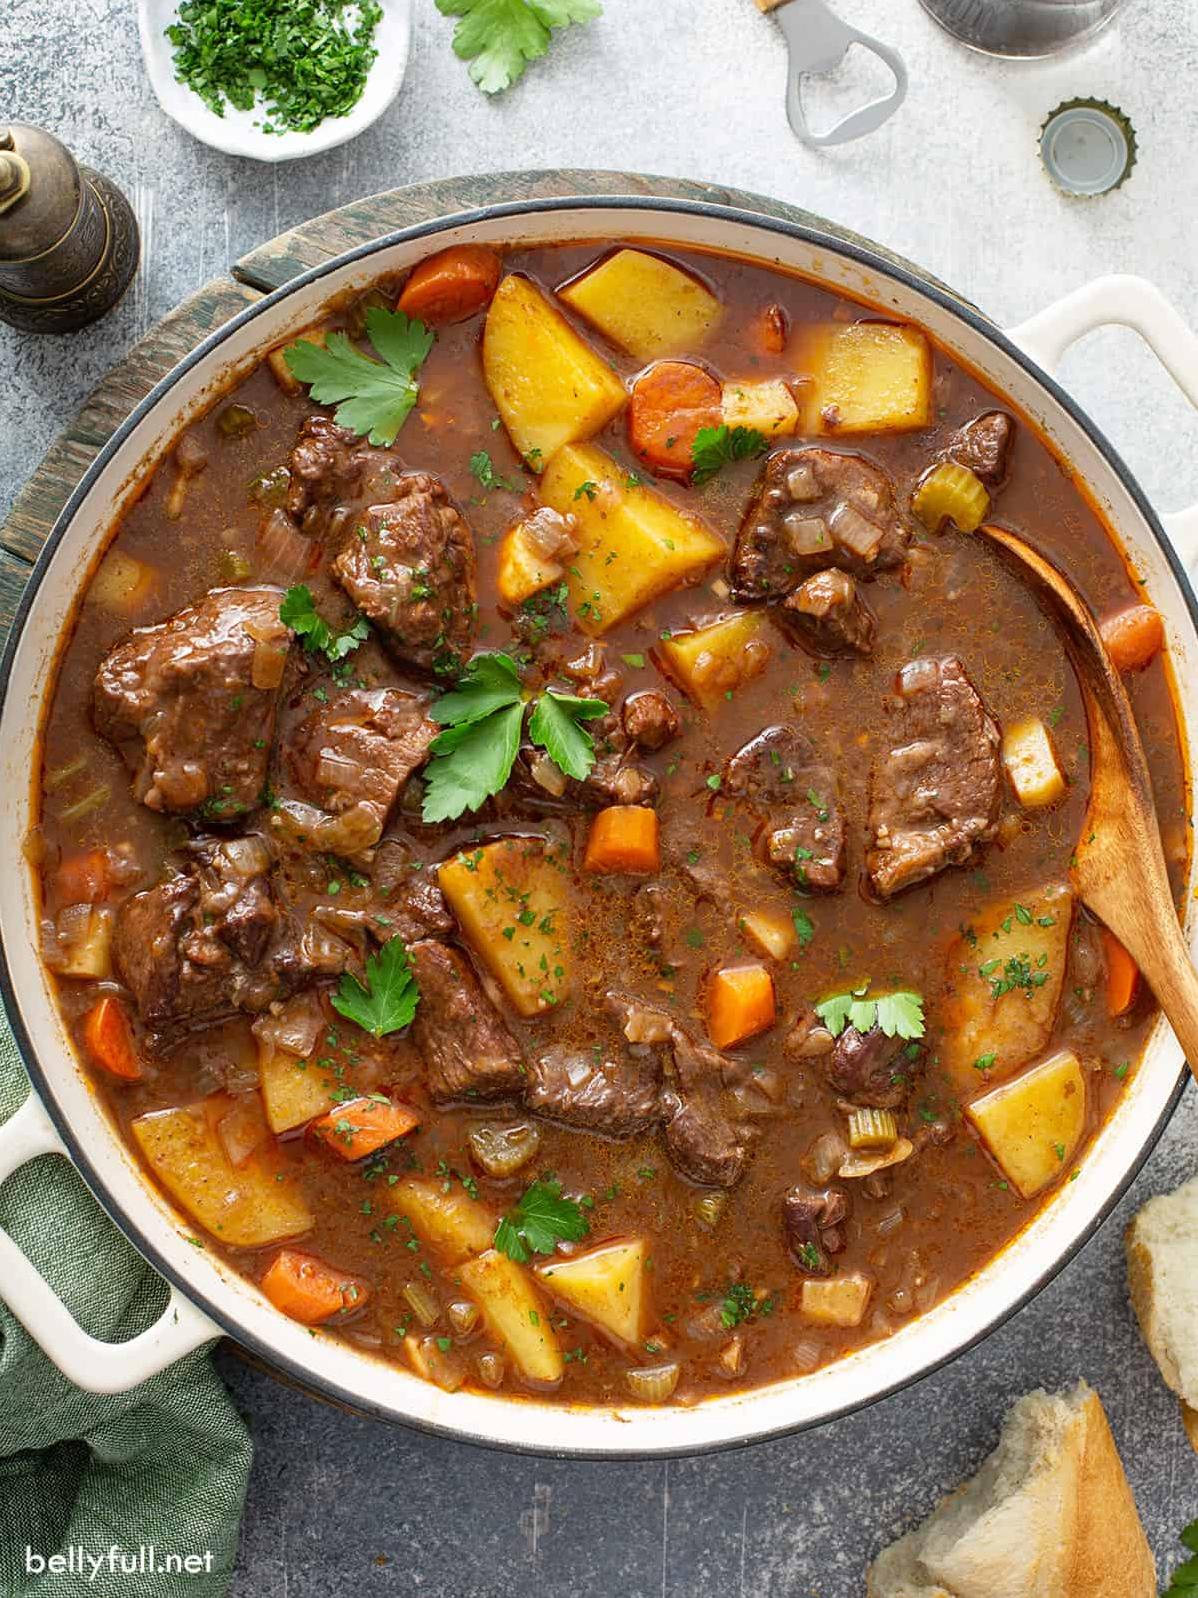  Tender beef, potatoes, and carrots, all cooked in flavorful broth.